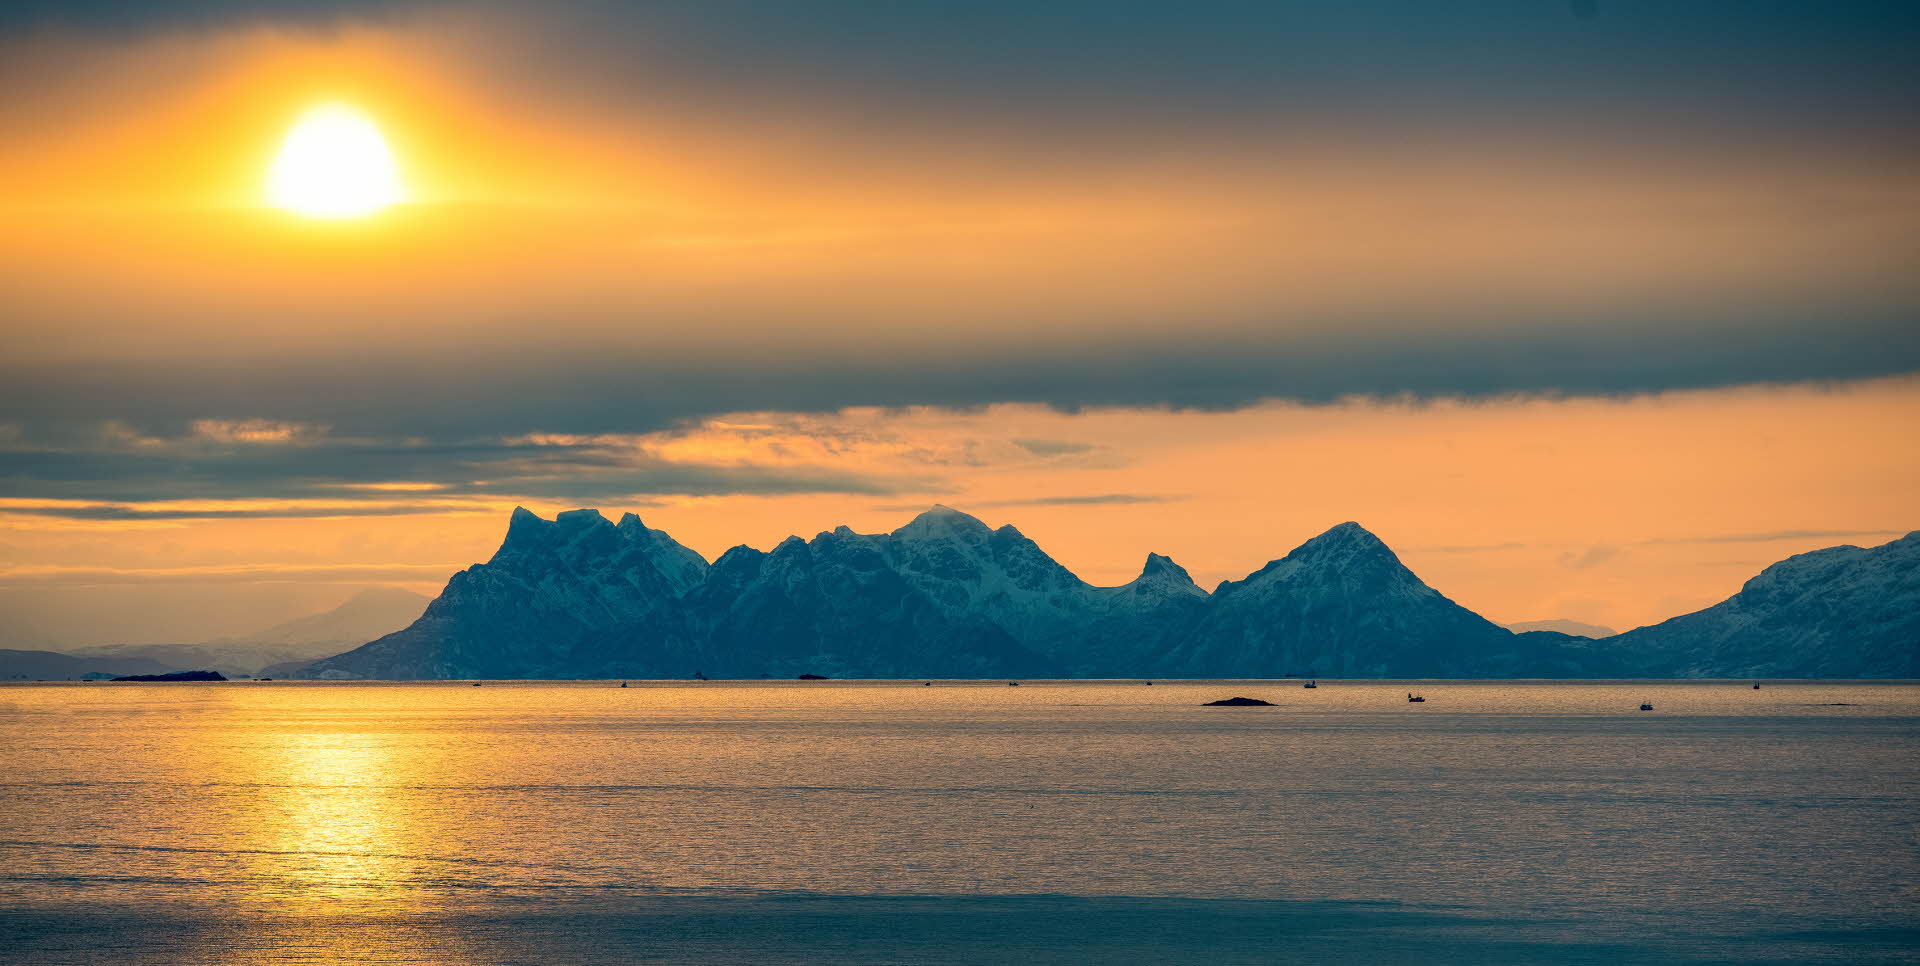 Yellow sun above snow-covered mountains. Calm sea with small boats in front.